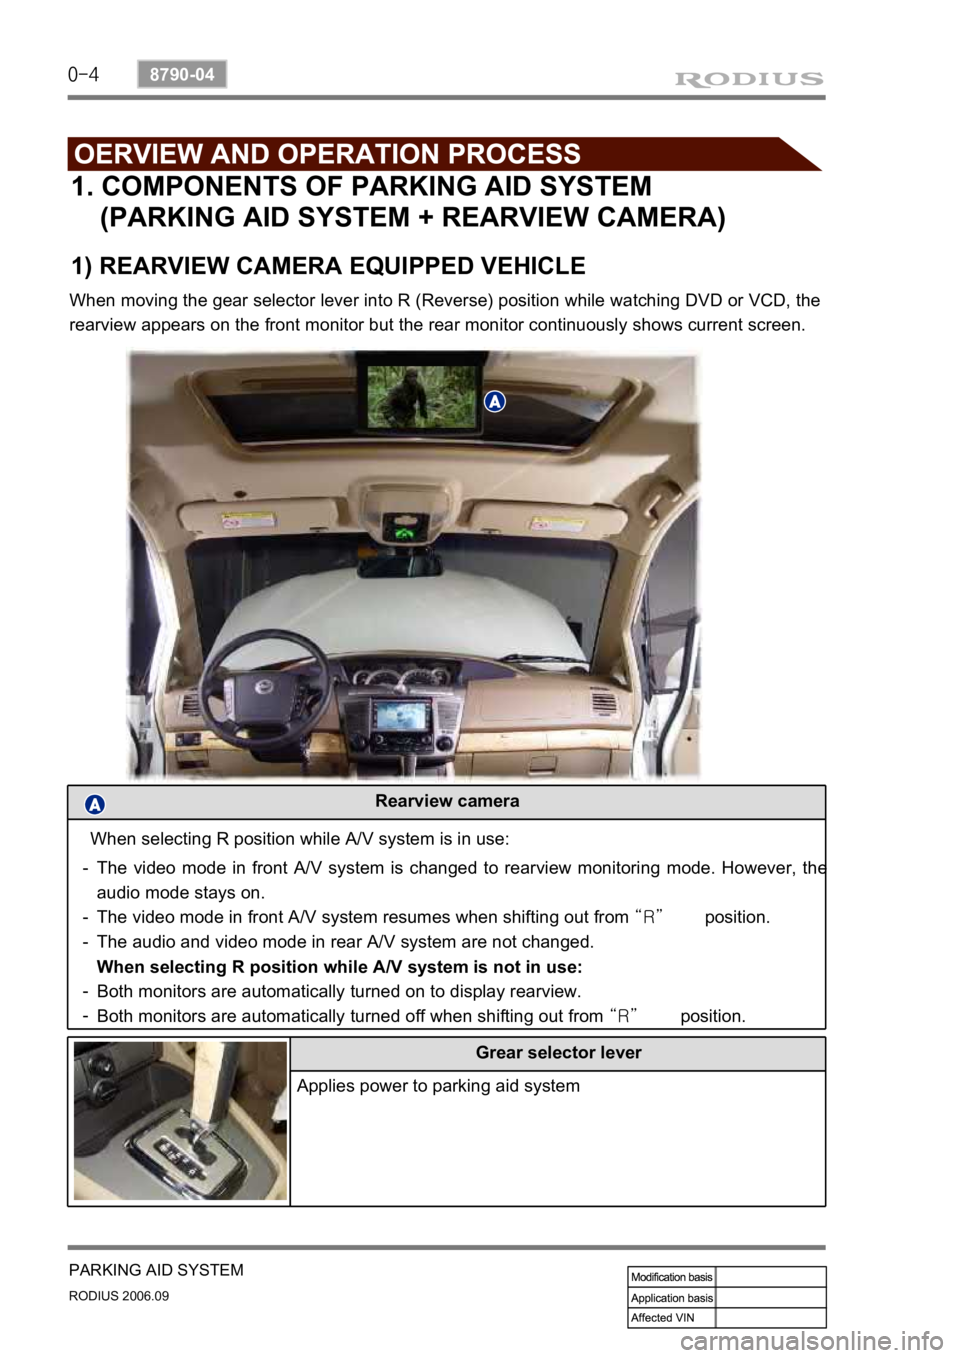 SSANGYONG RODIUS 2007  Service Manual 0-4
RODIUS 2006.09
8790-04
PARKING AID SYSTEM
Grear selector lever 
Applies power to parking aid system
Rearview camera
1. COMPONENTS OF PARKING AID SYSTEM  (PARKING AID SYSTEM + REARVIEW CAMERA)
1) R